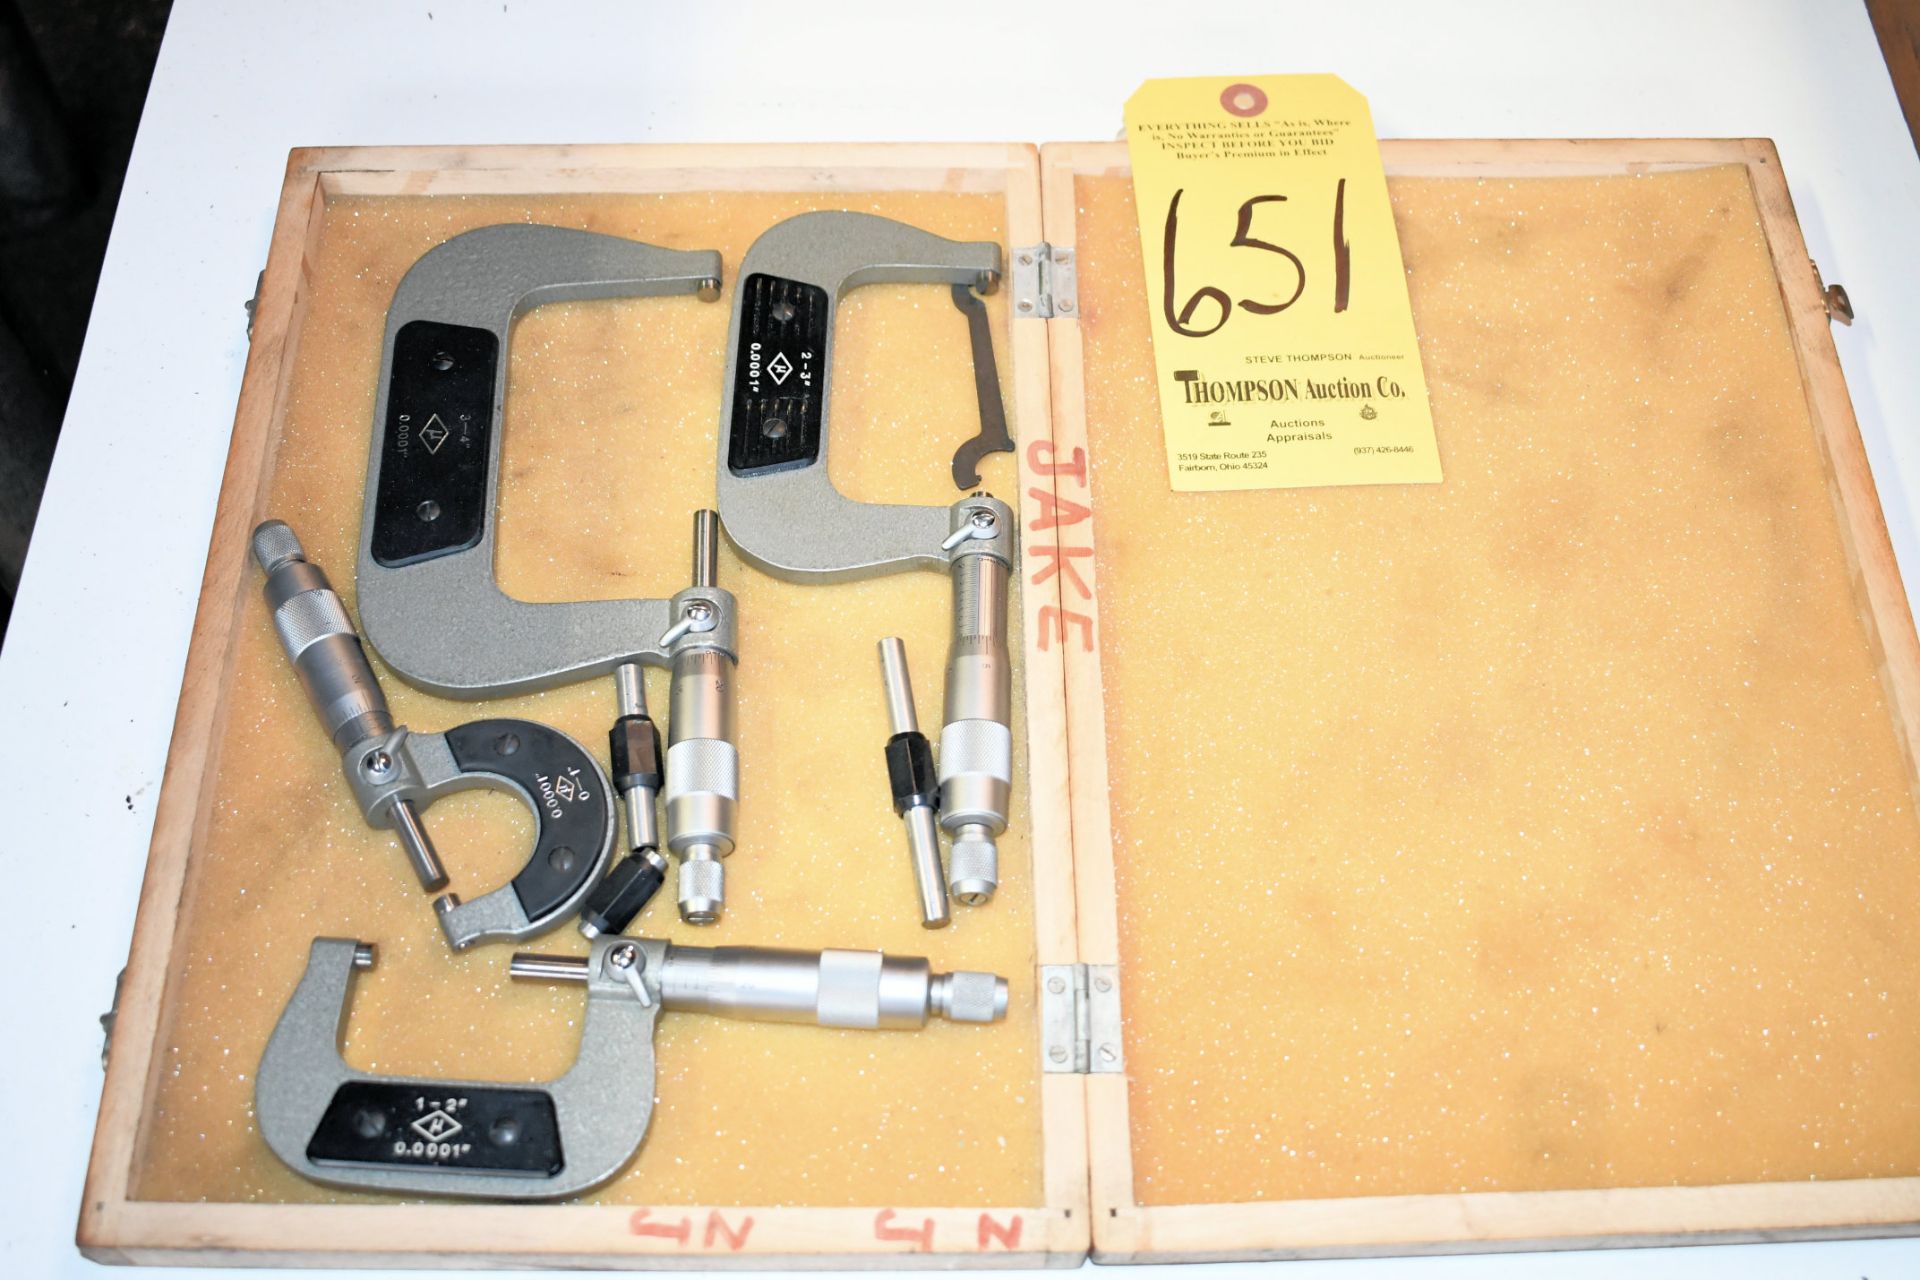 Lot-(4) Micrometers with Case, 0" - 1", 1" - 2", 2" - 3", 3" - 4"